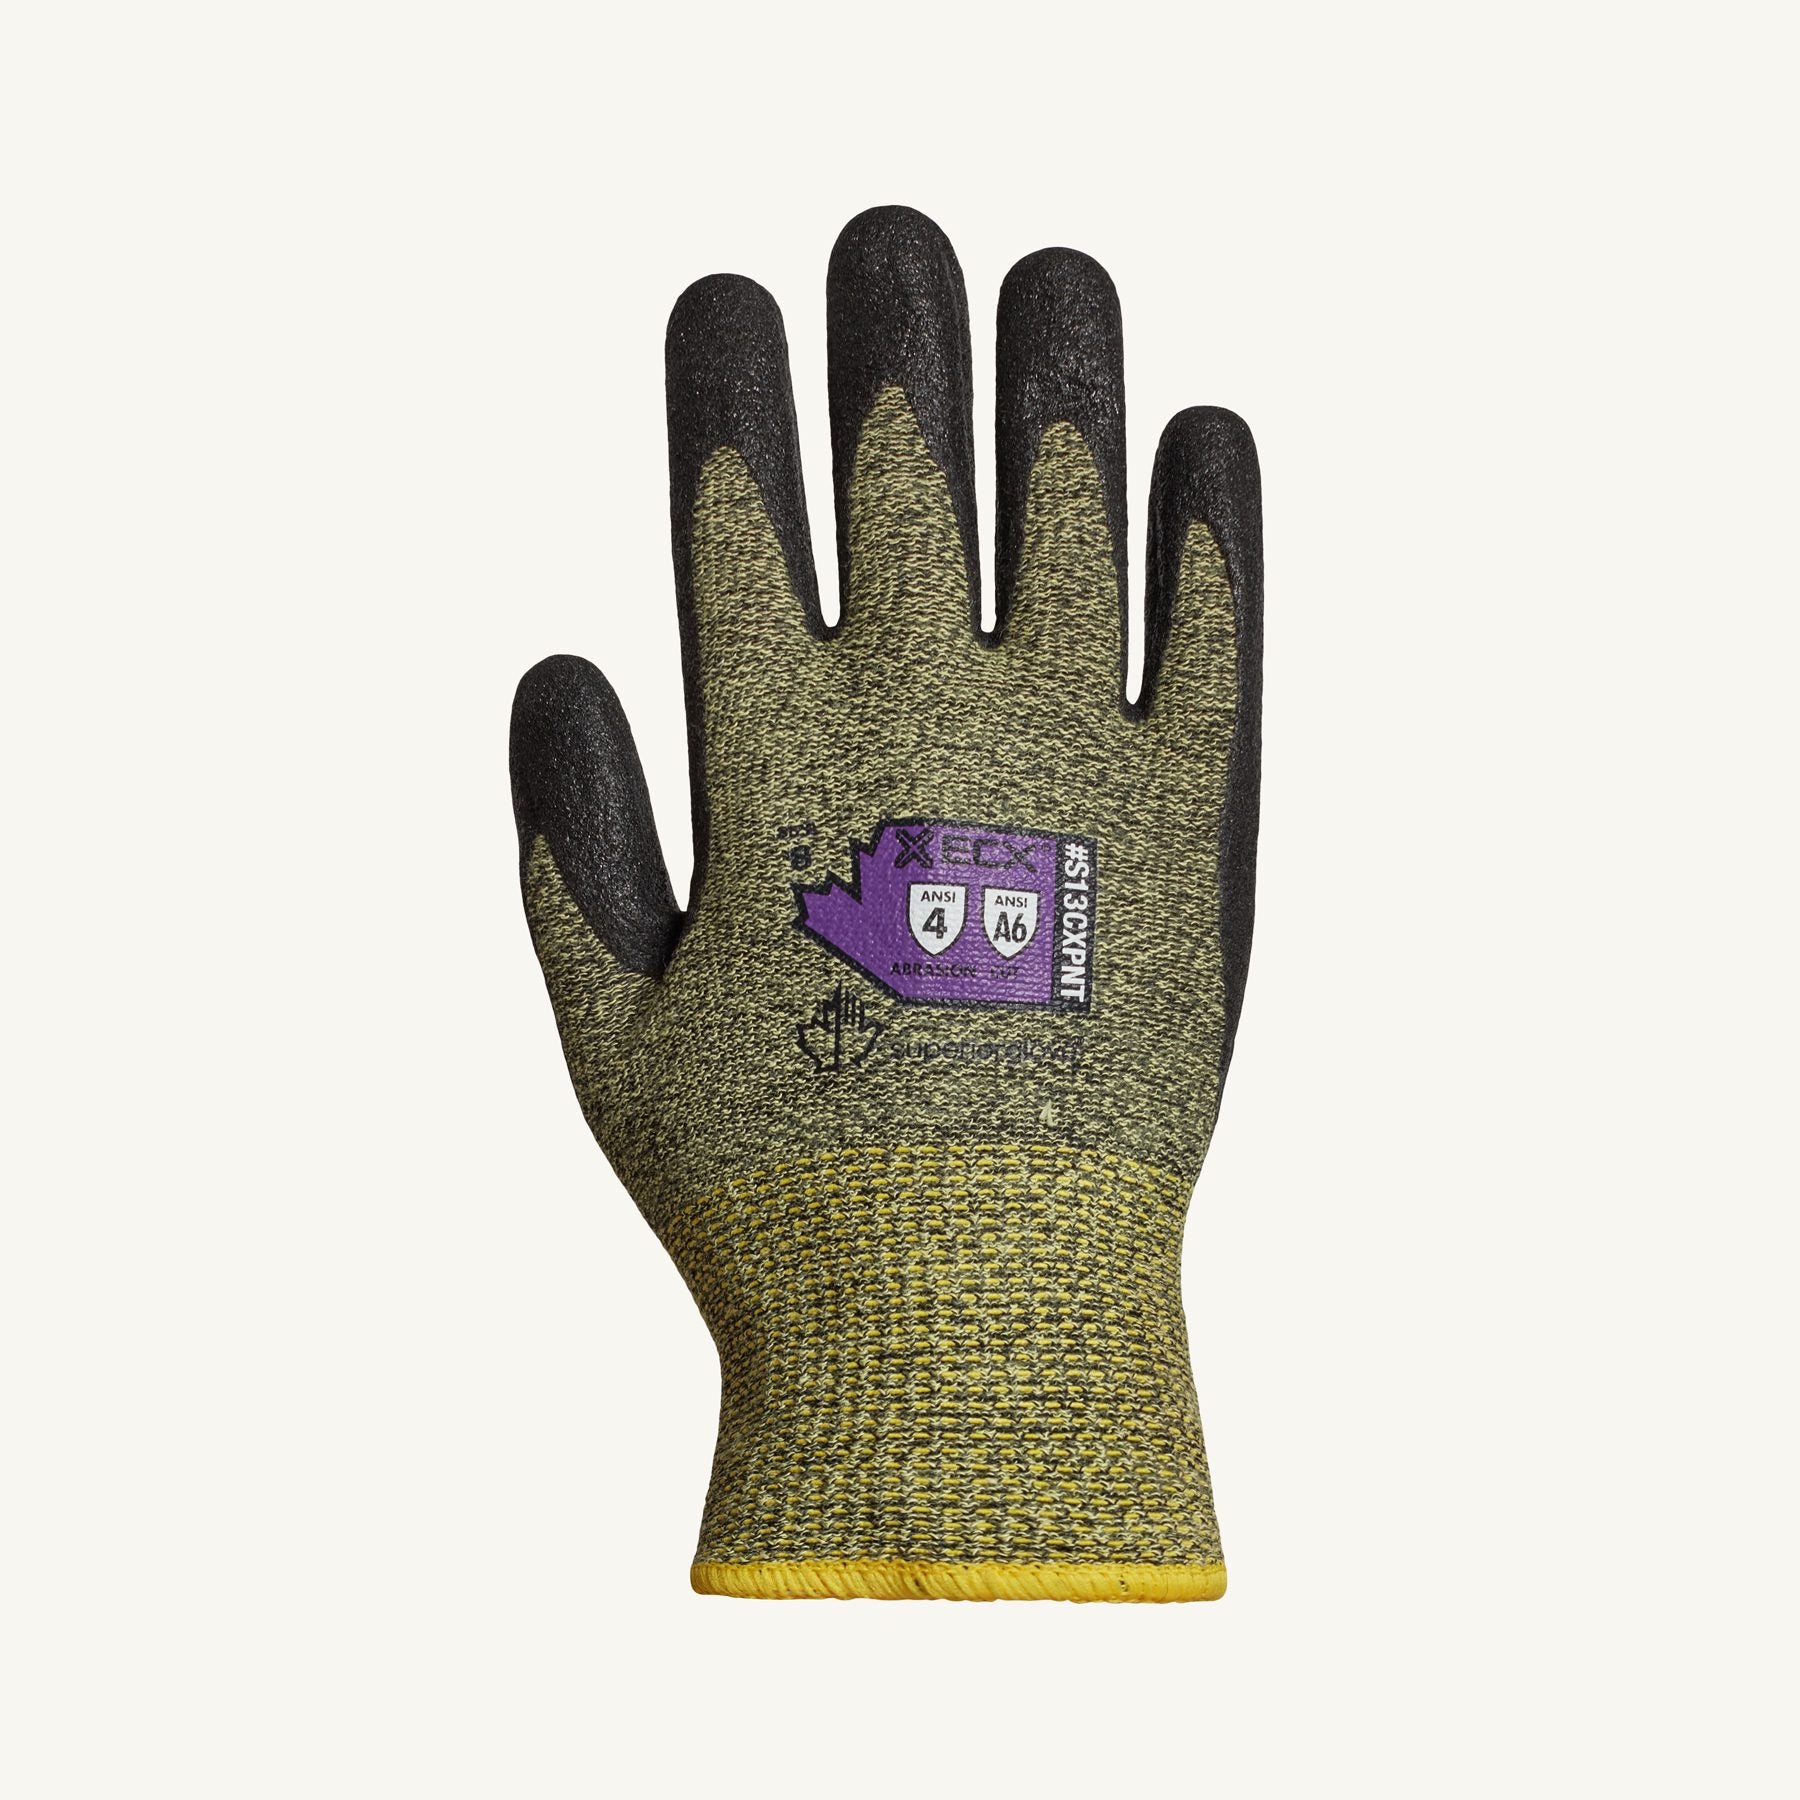 Emerald CX Kevlar Composite Knit Gloves with Micropore Nitrile Palms